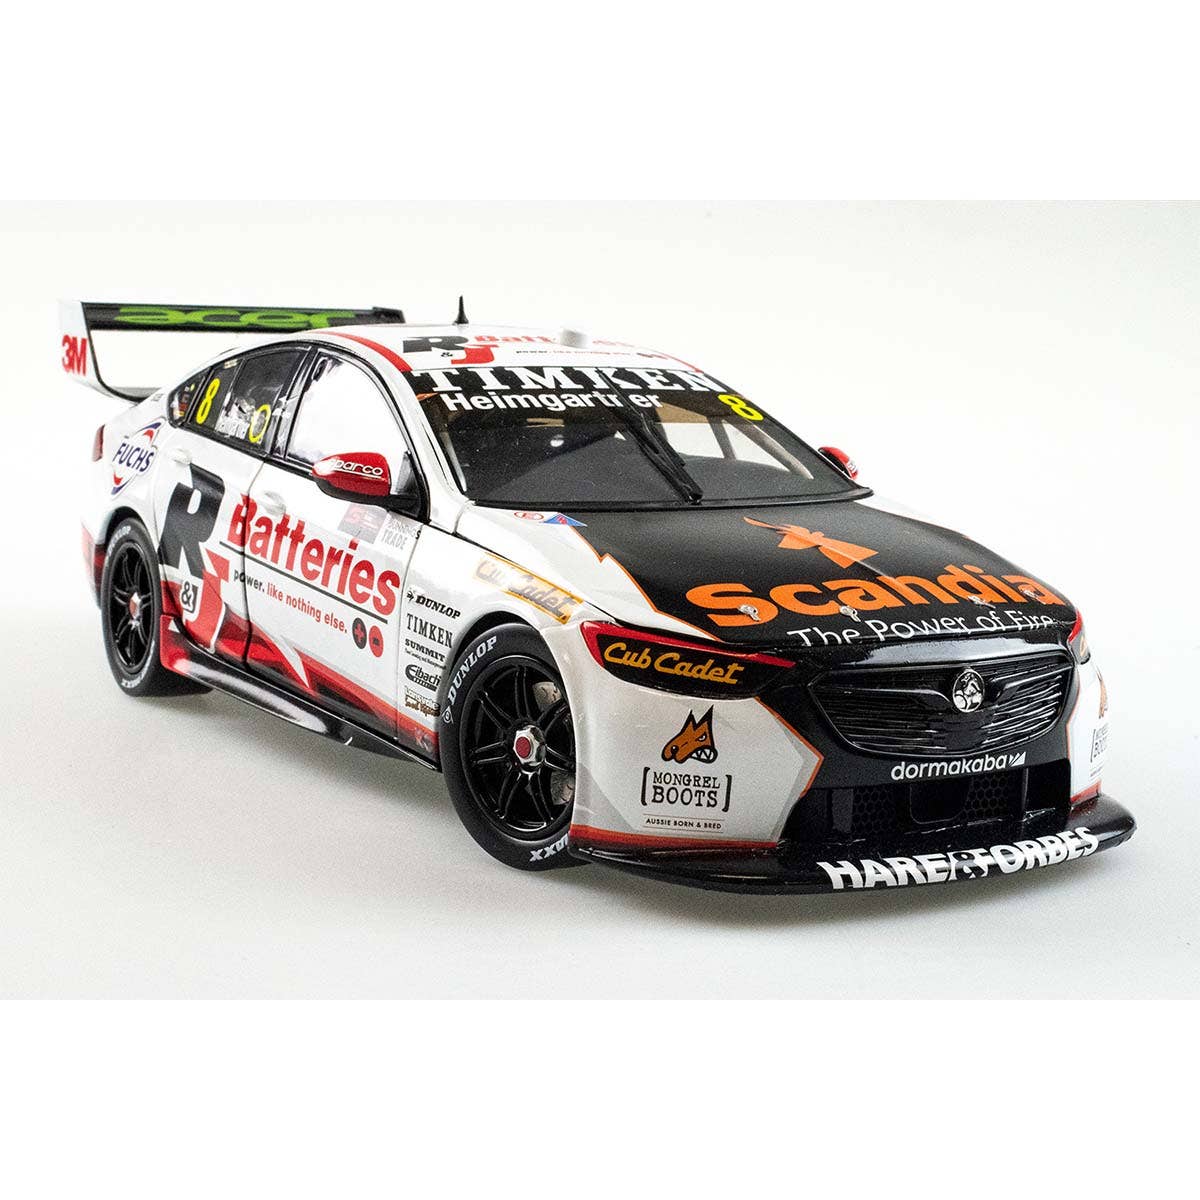 HOLDEN ZB COMMODORE - BJR - ANDRE HEIMGARTNER #8 R&J Batteries/Scandia - Bunnings Trade Perth Supernight Race 11 3RD PLACE - 1:43 Scale Diecast Model Car